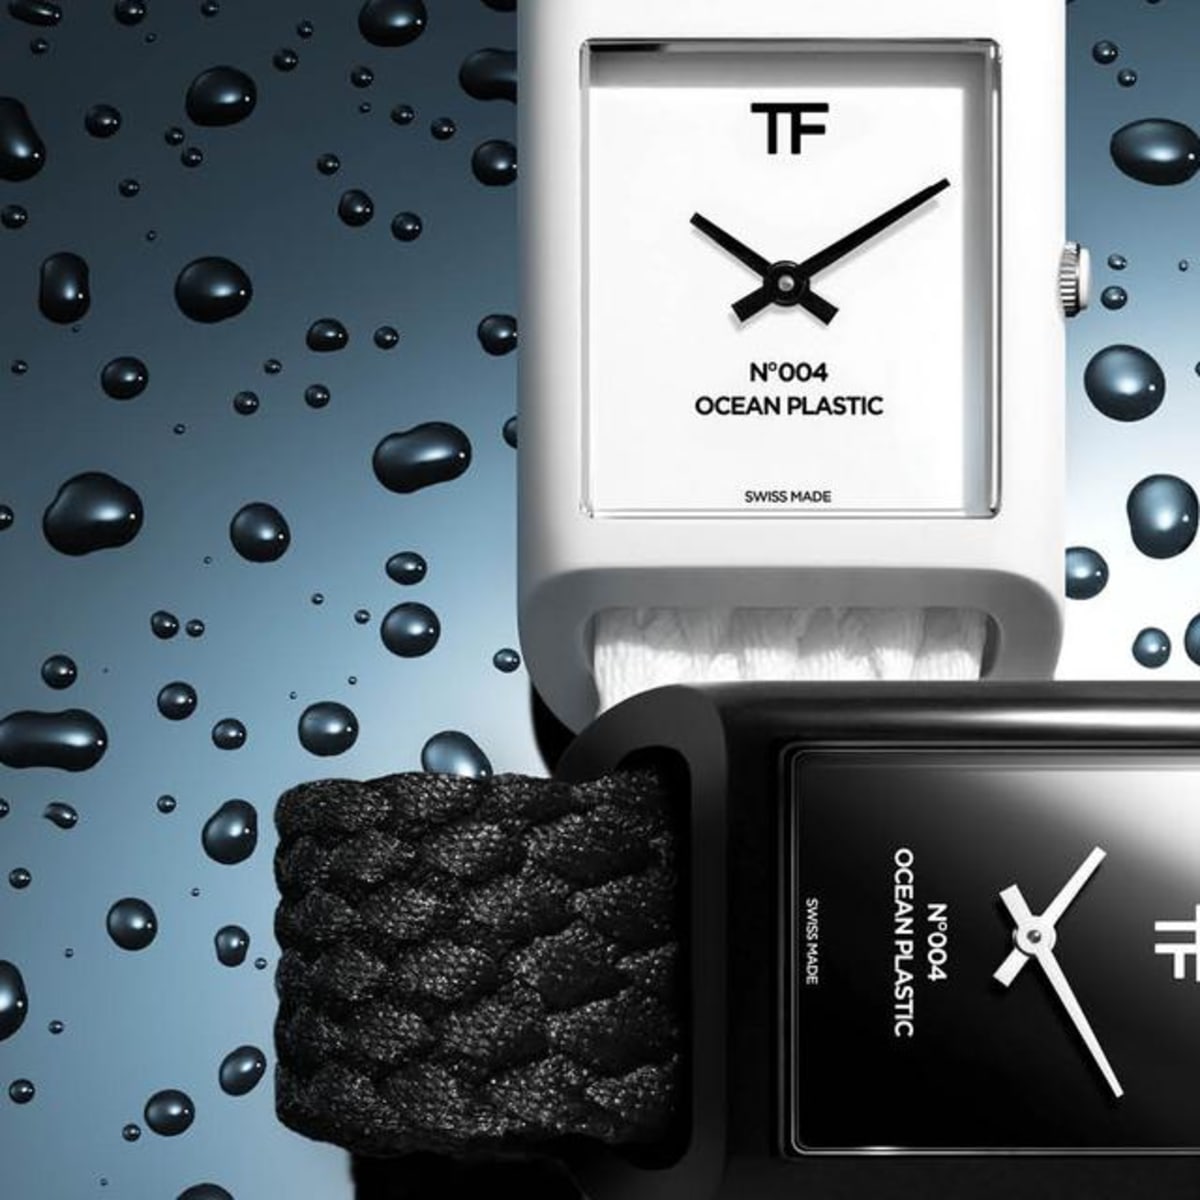 Tom Ford releases its latest Ocean Plastic watch, the 004 - Acquire